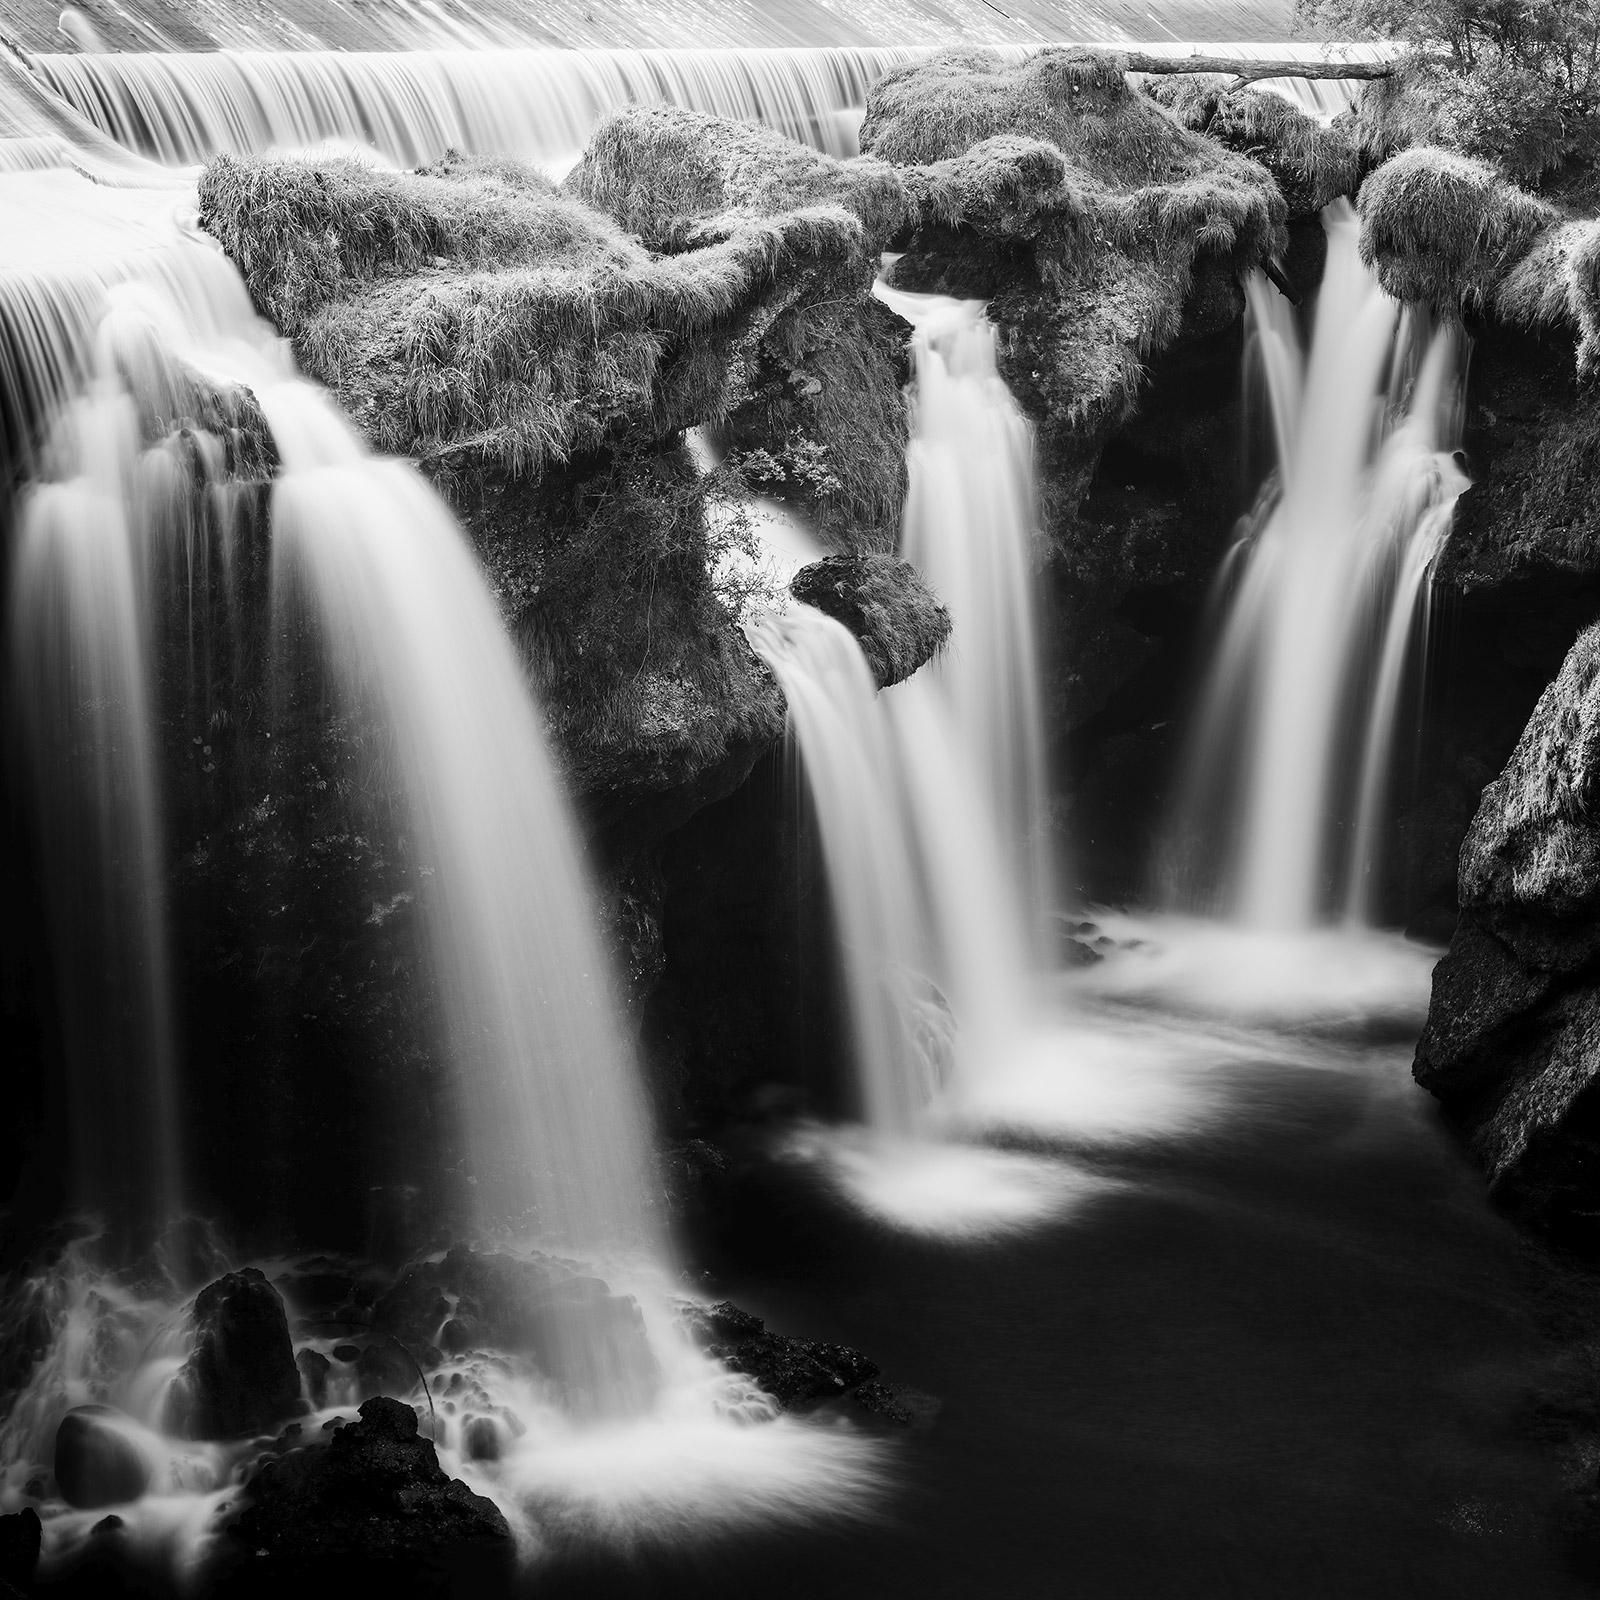 Gerald Berghammer Black and White Photograph - Fahrbahren Fall, Waterfall, black and white long exposure landscape photography